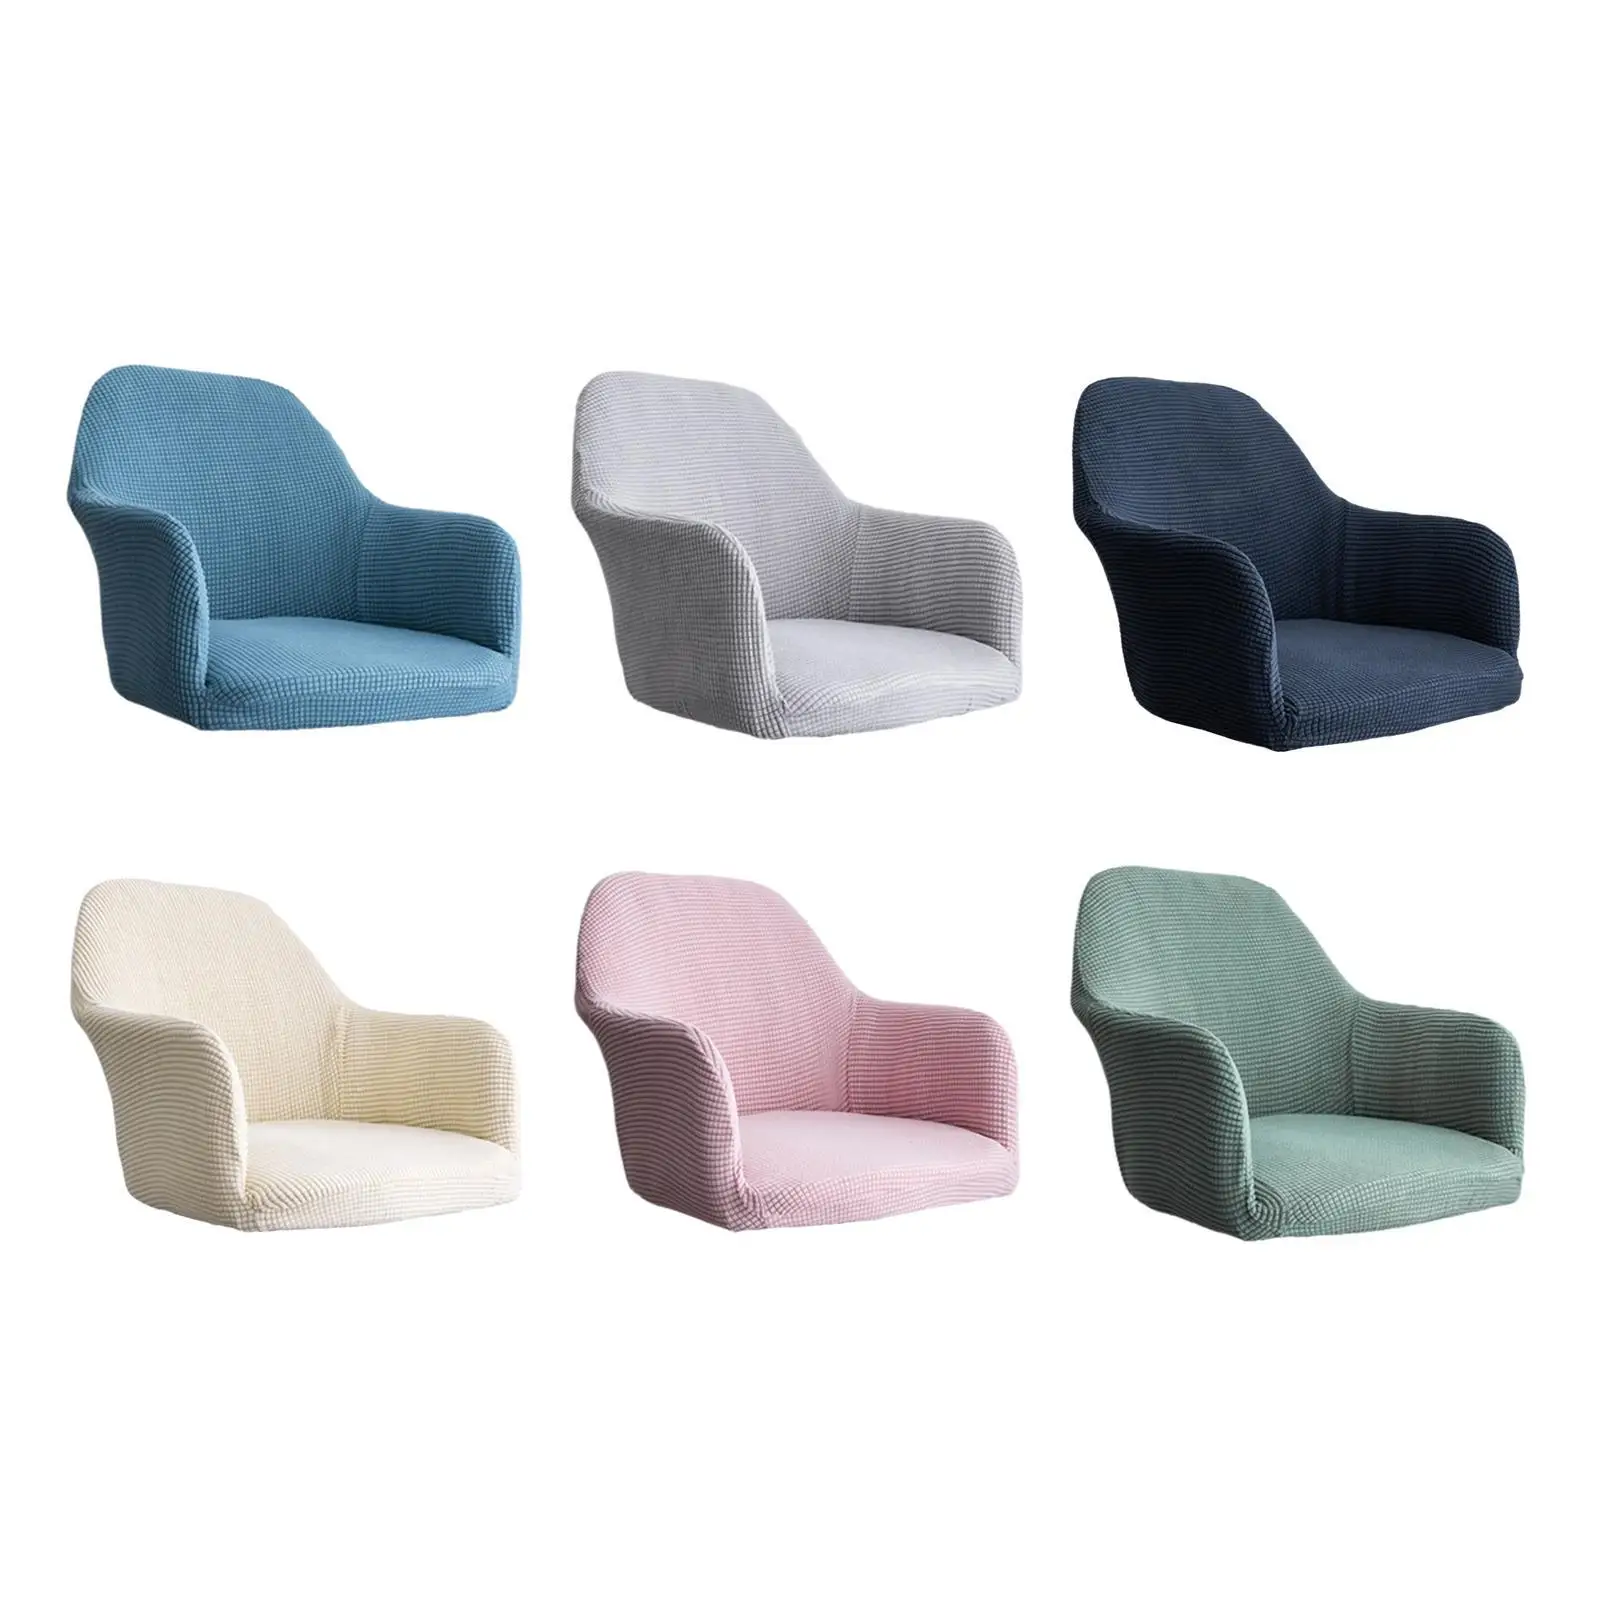 Soft Stretchy Jacquard Polyester Chair Slipcover Chair Cover Armchair Seat Case Washable for Dining Room Home Kitchen